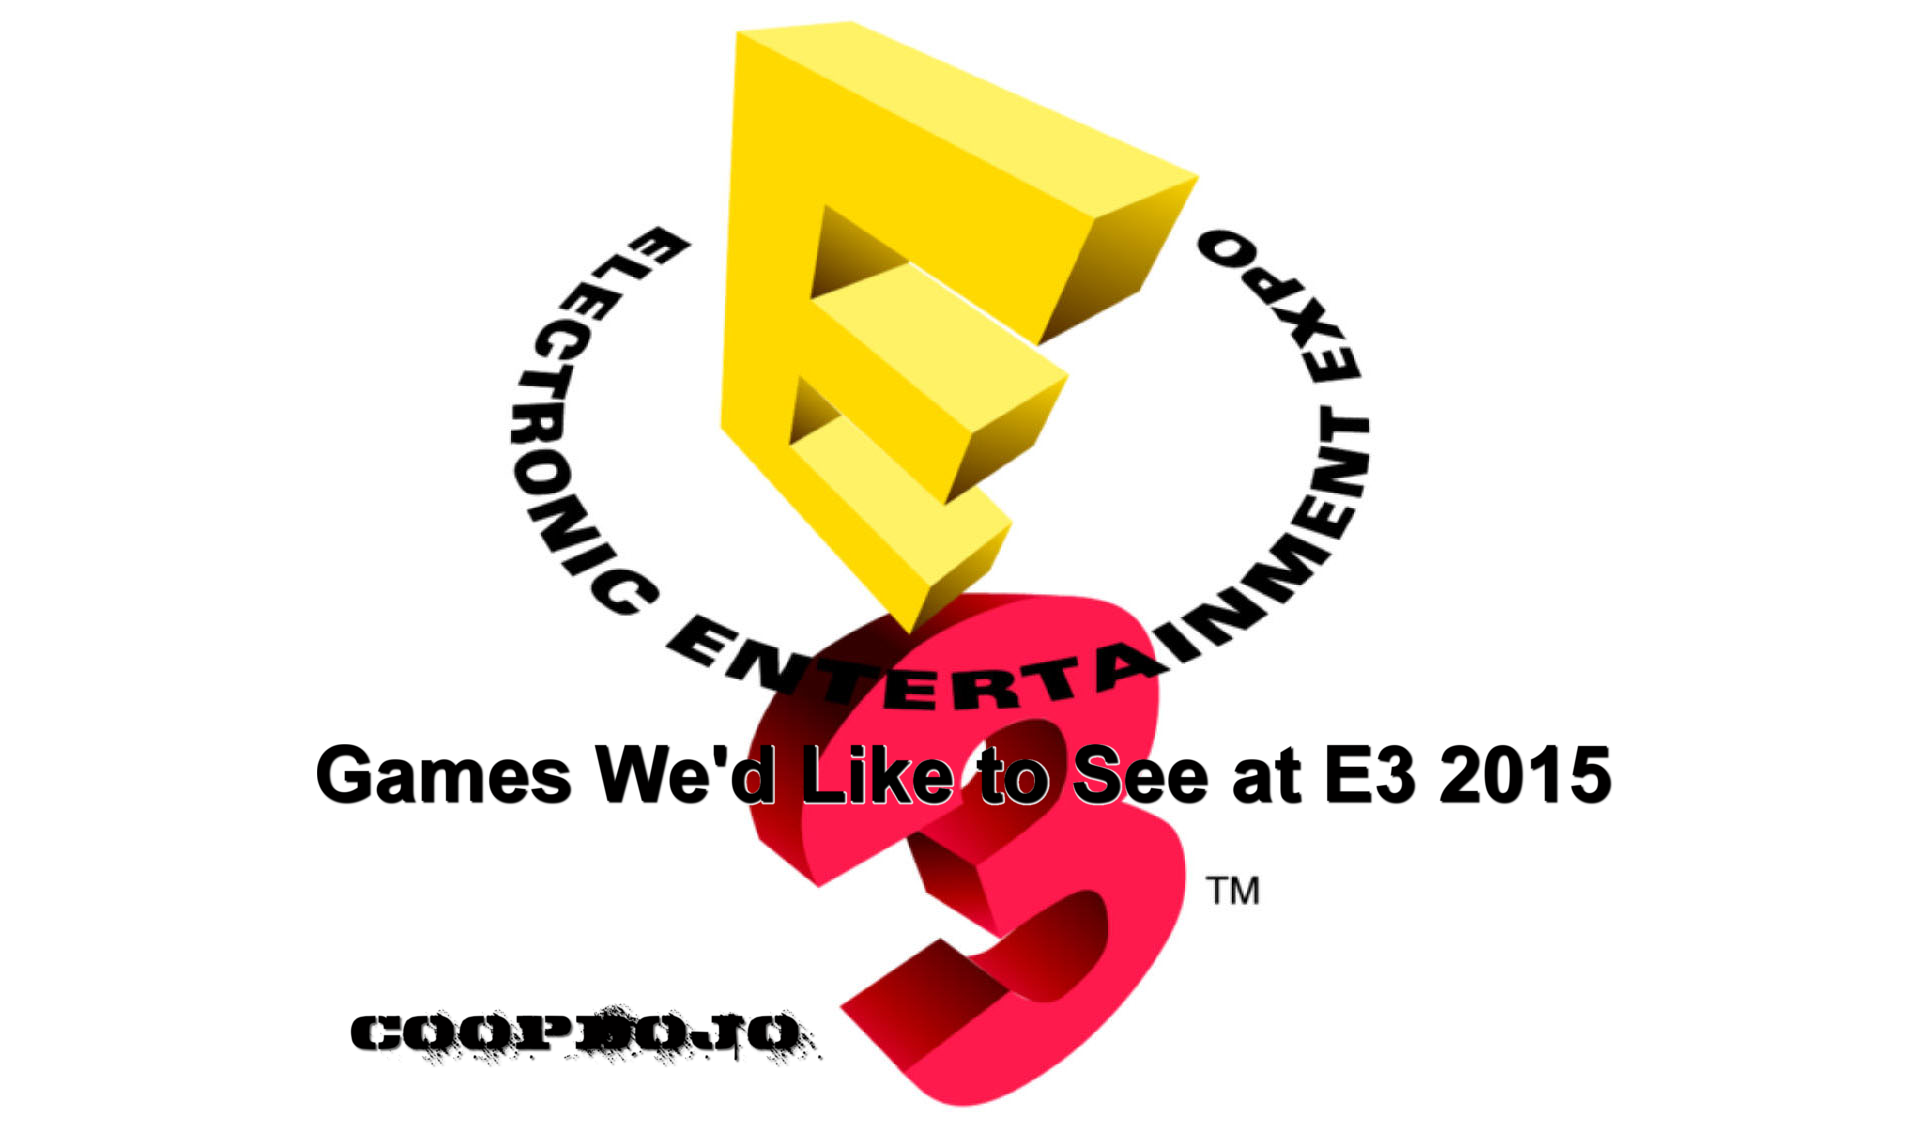 Games We’d Like To See At E3 2015